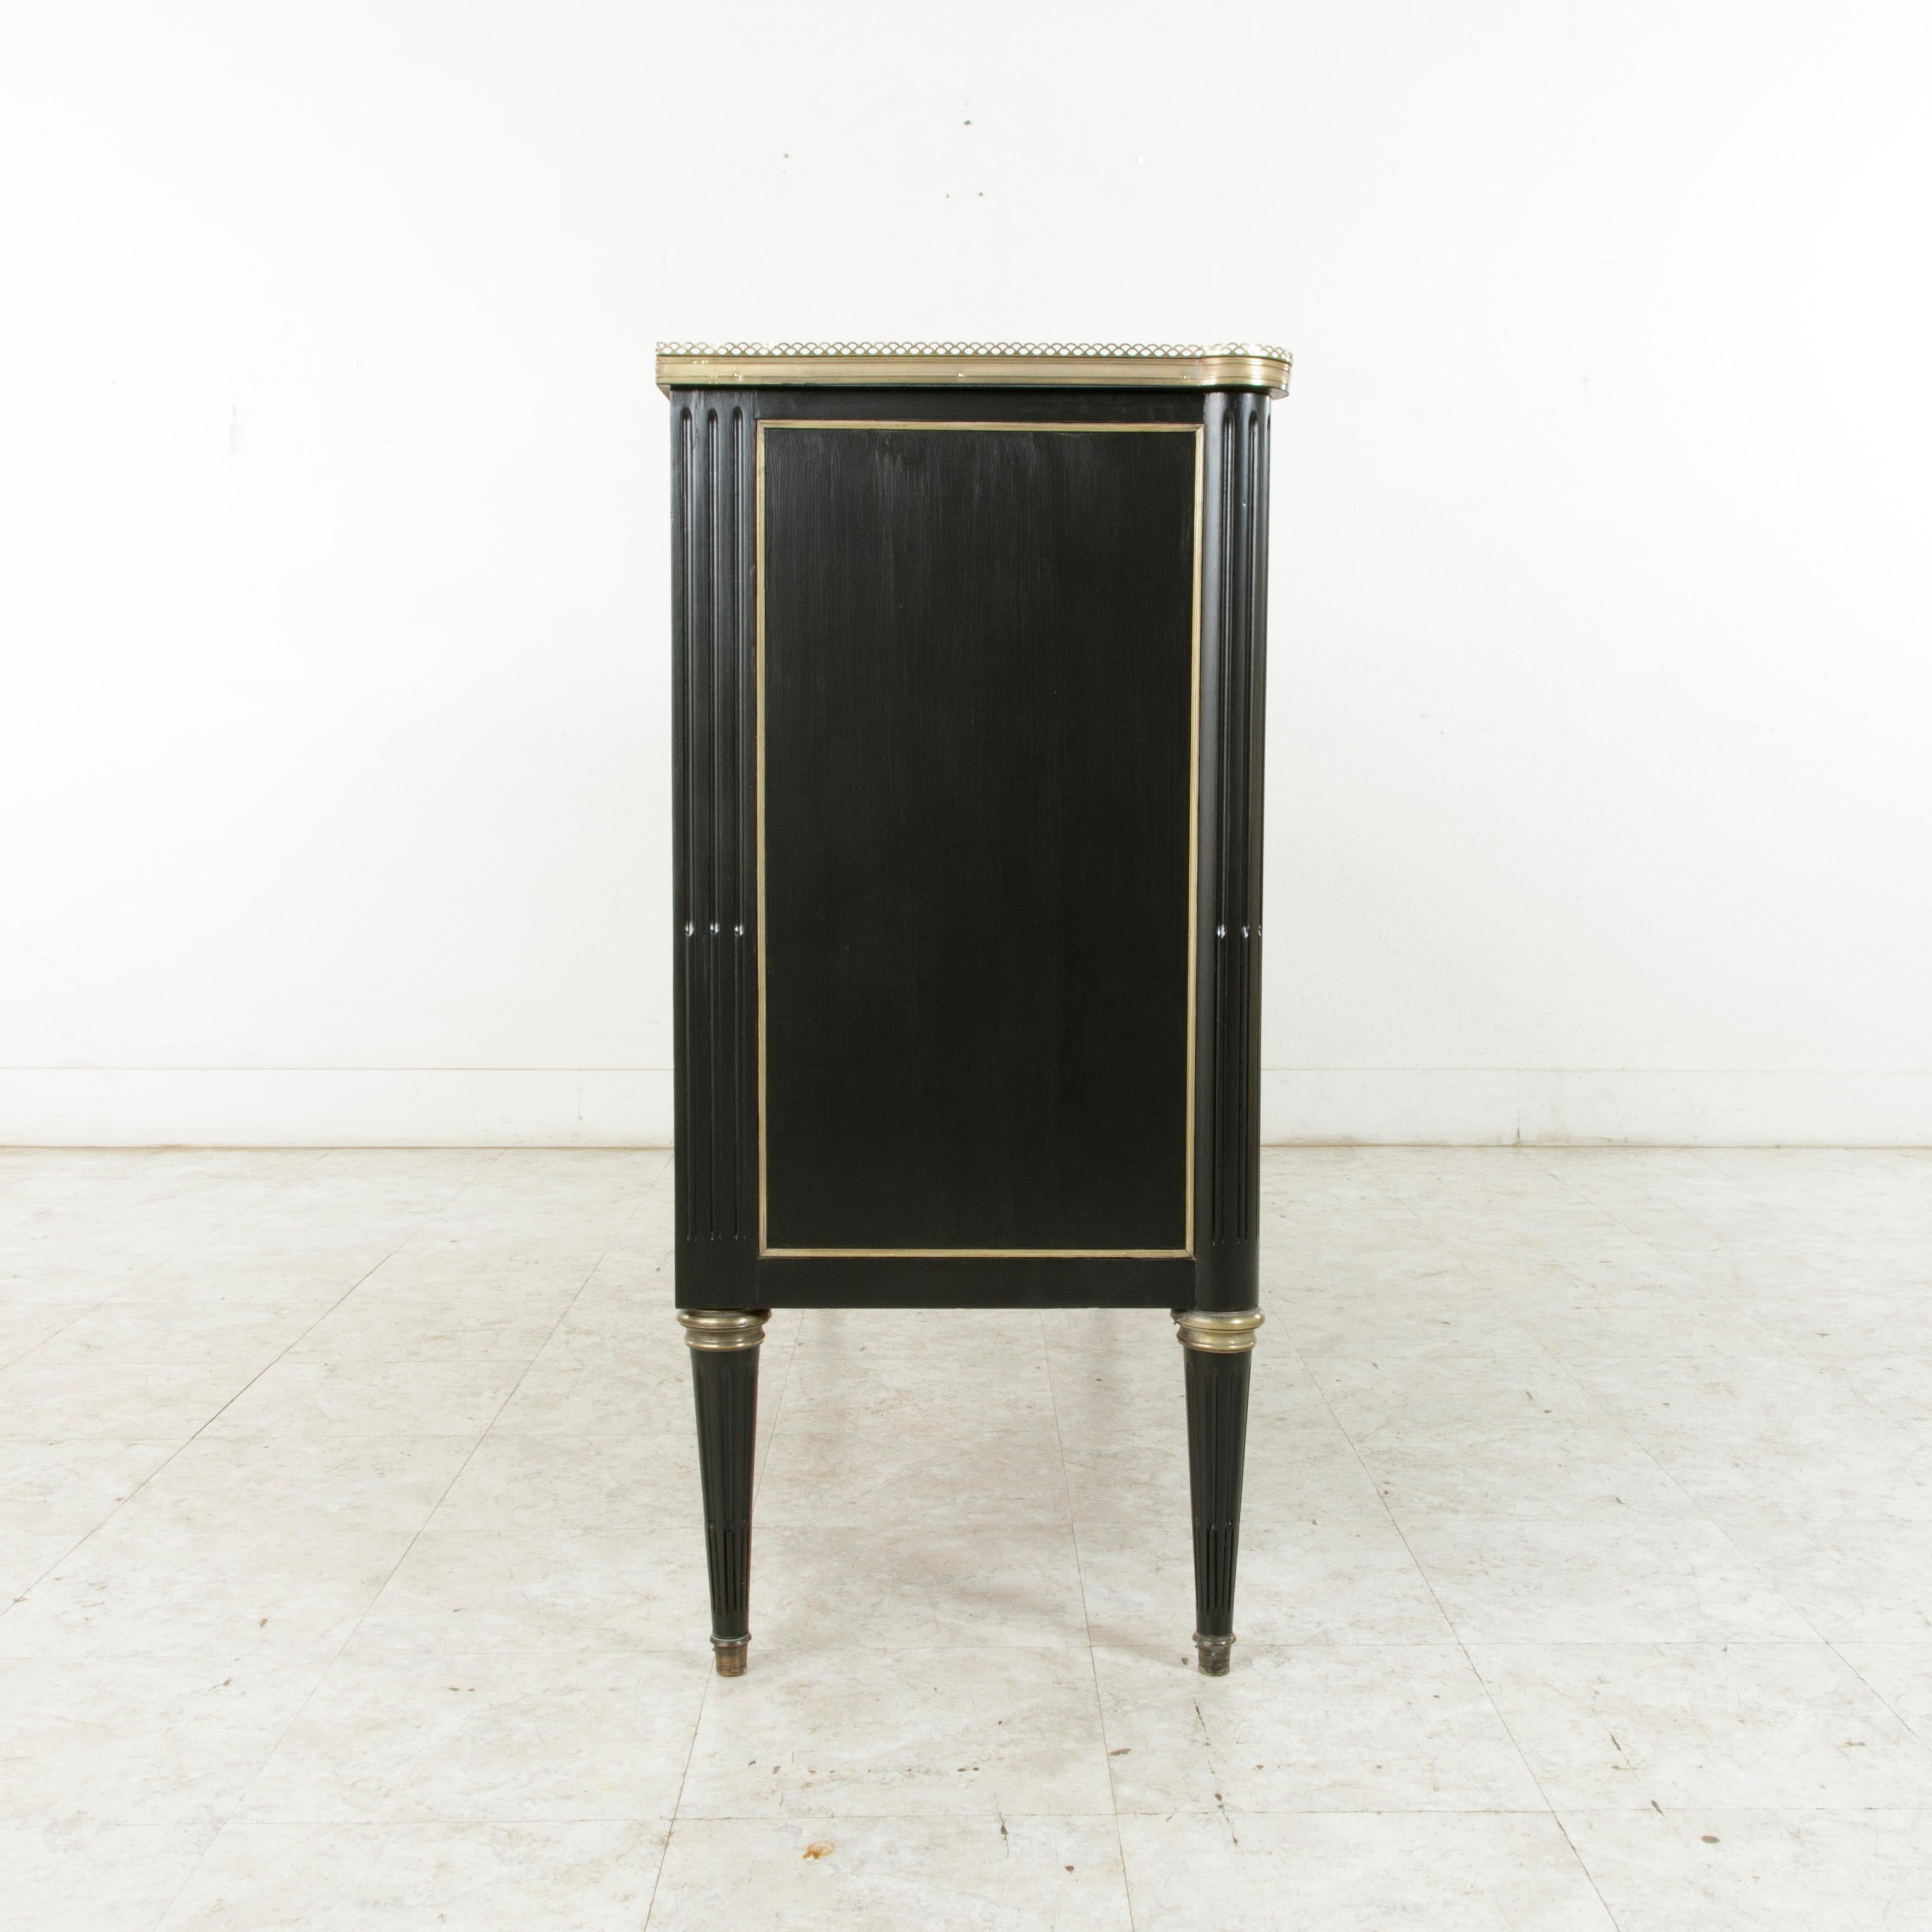 Painted French Louis XVI Style Ebonized Buffet or Sideboard with White Marble Top